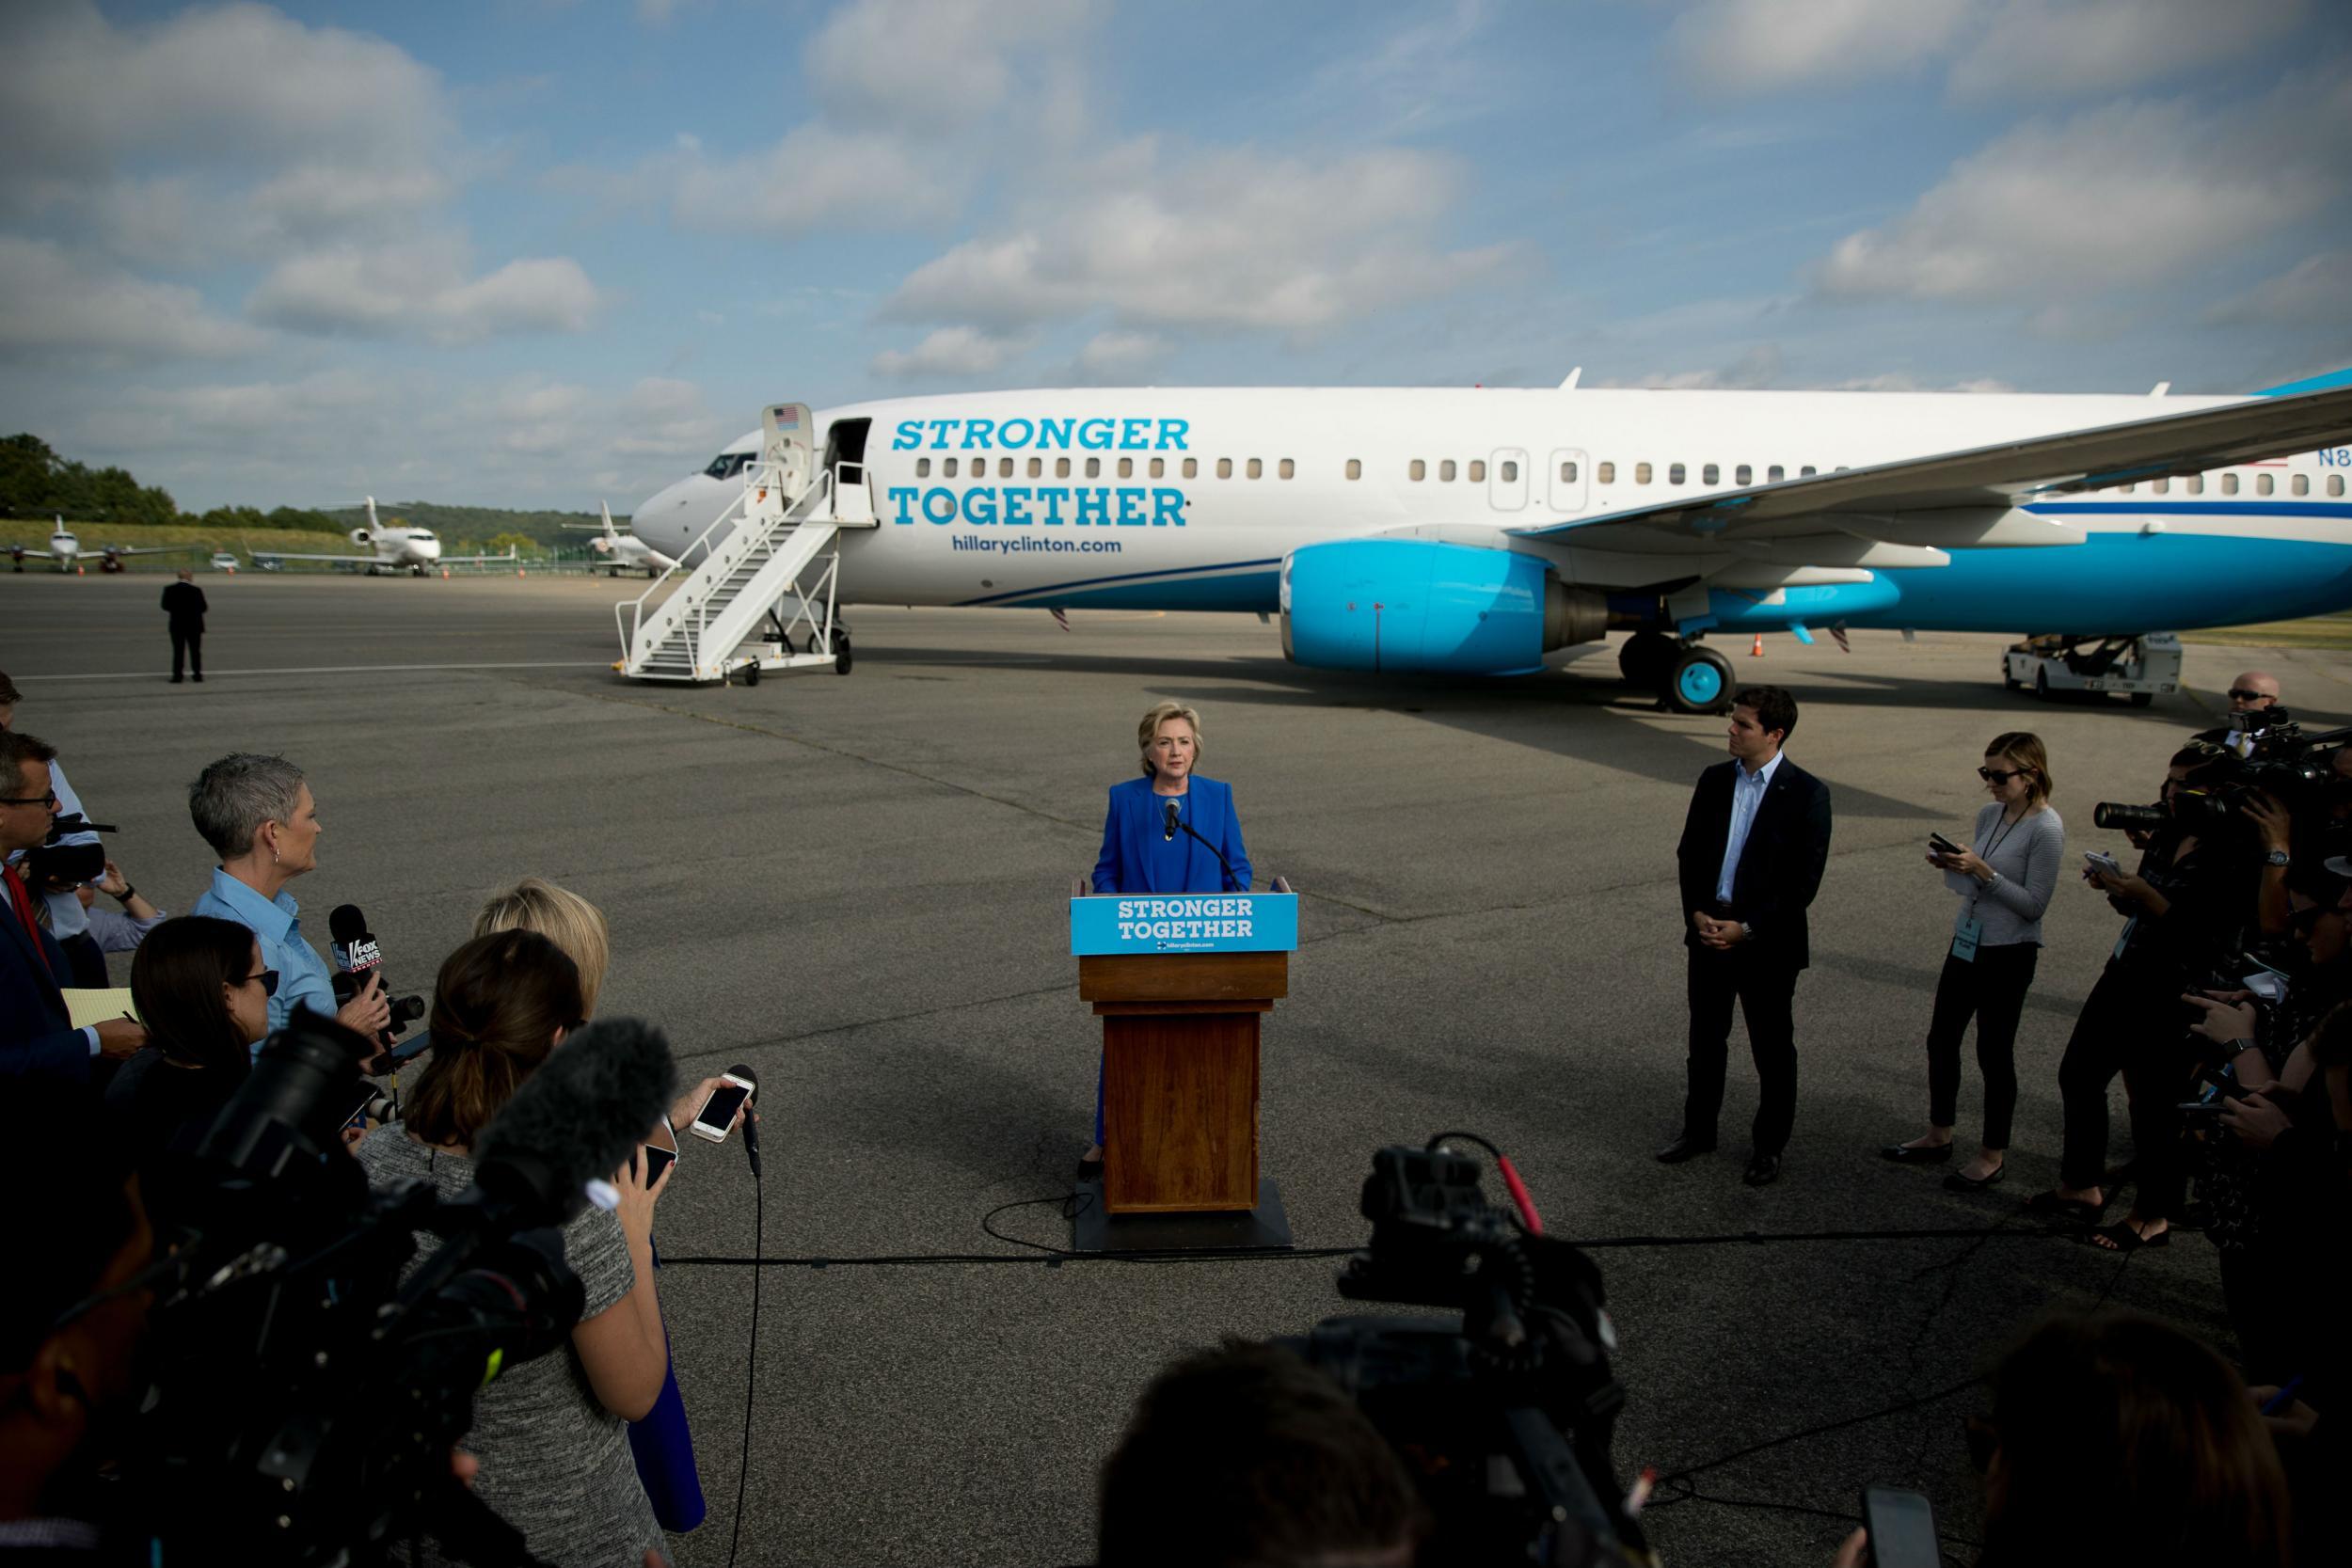 Hillary Clinton blasts Donald Trump with her campaign plane behind her